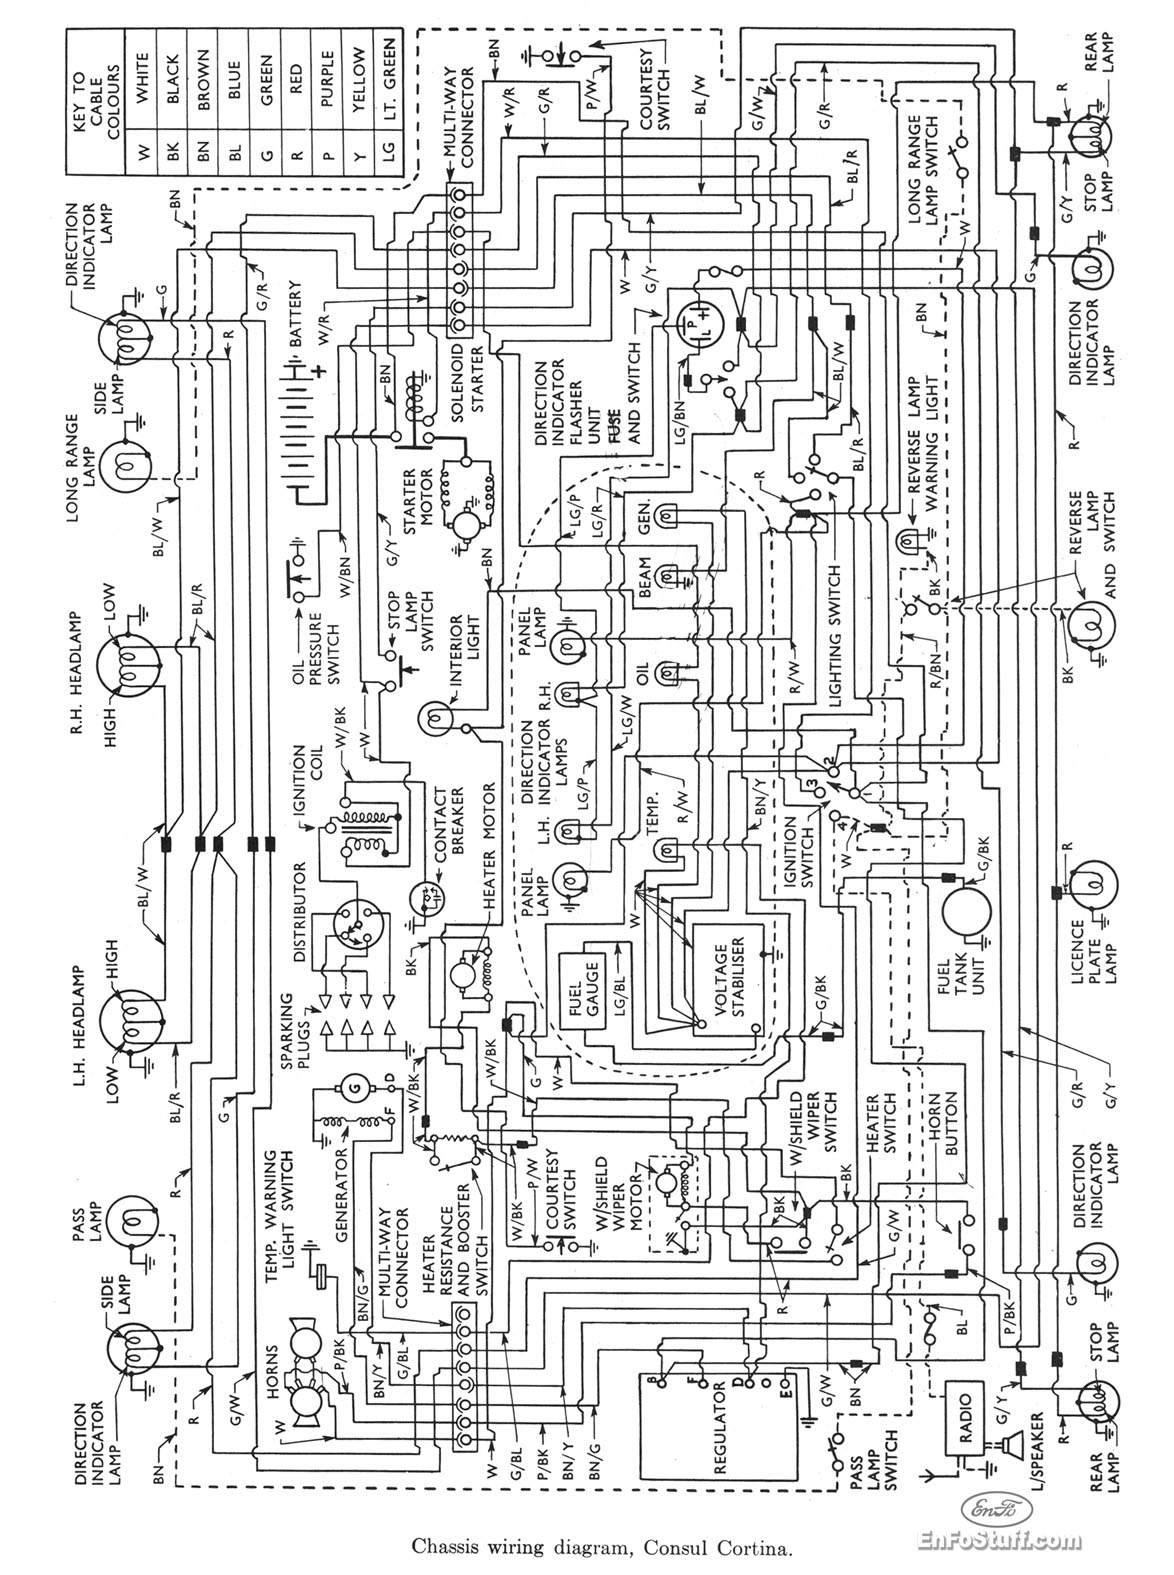 Wiring Diagram For A Ford from www.enfostuff.com